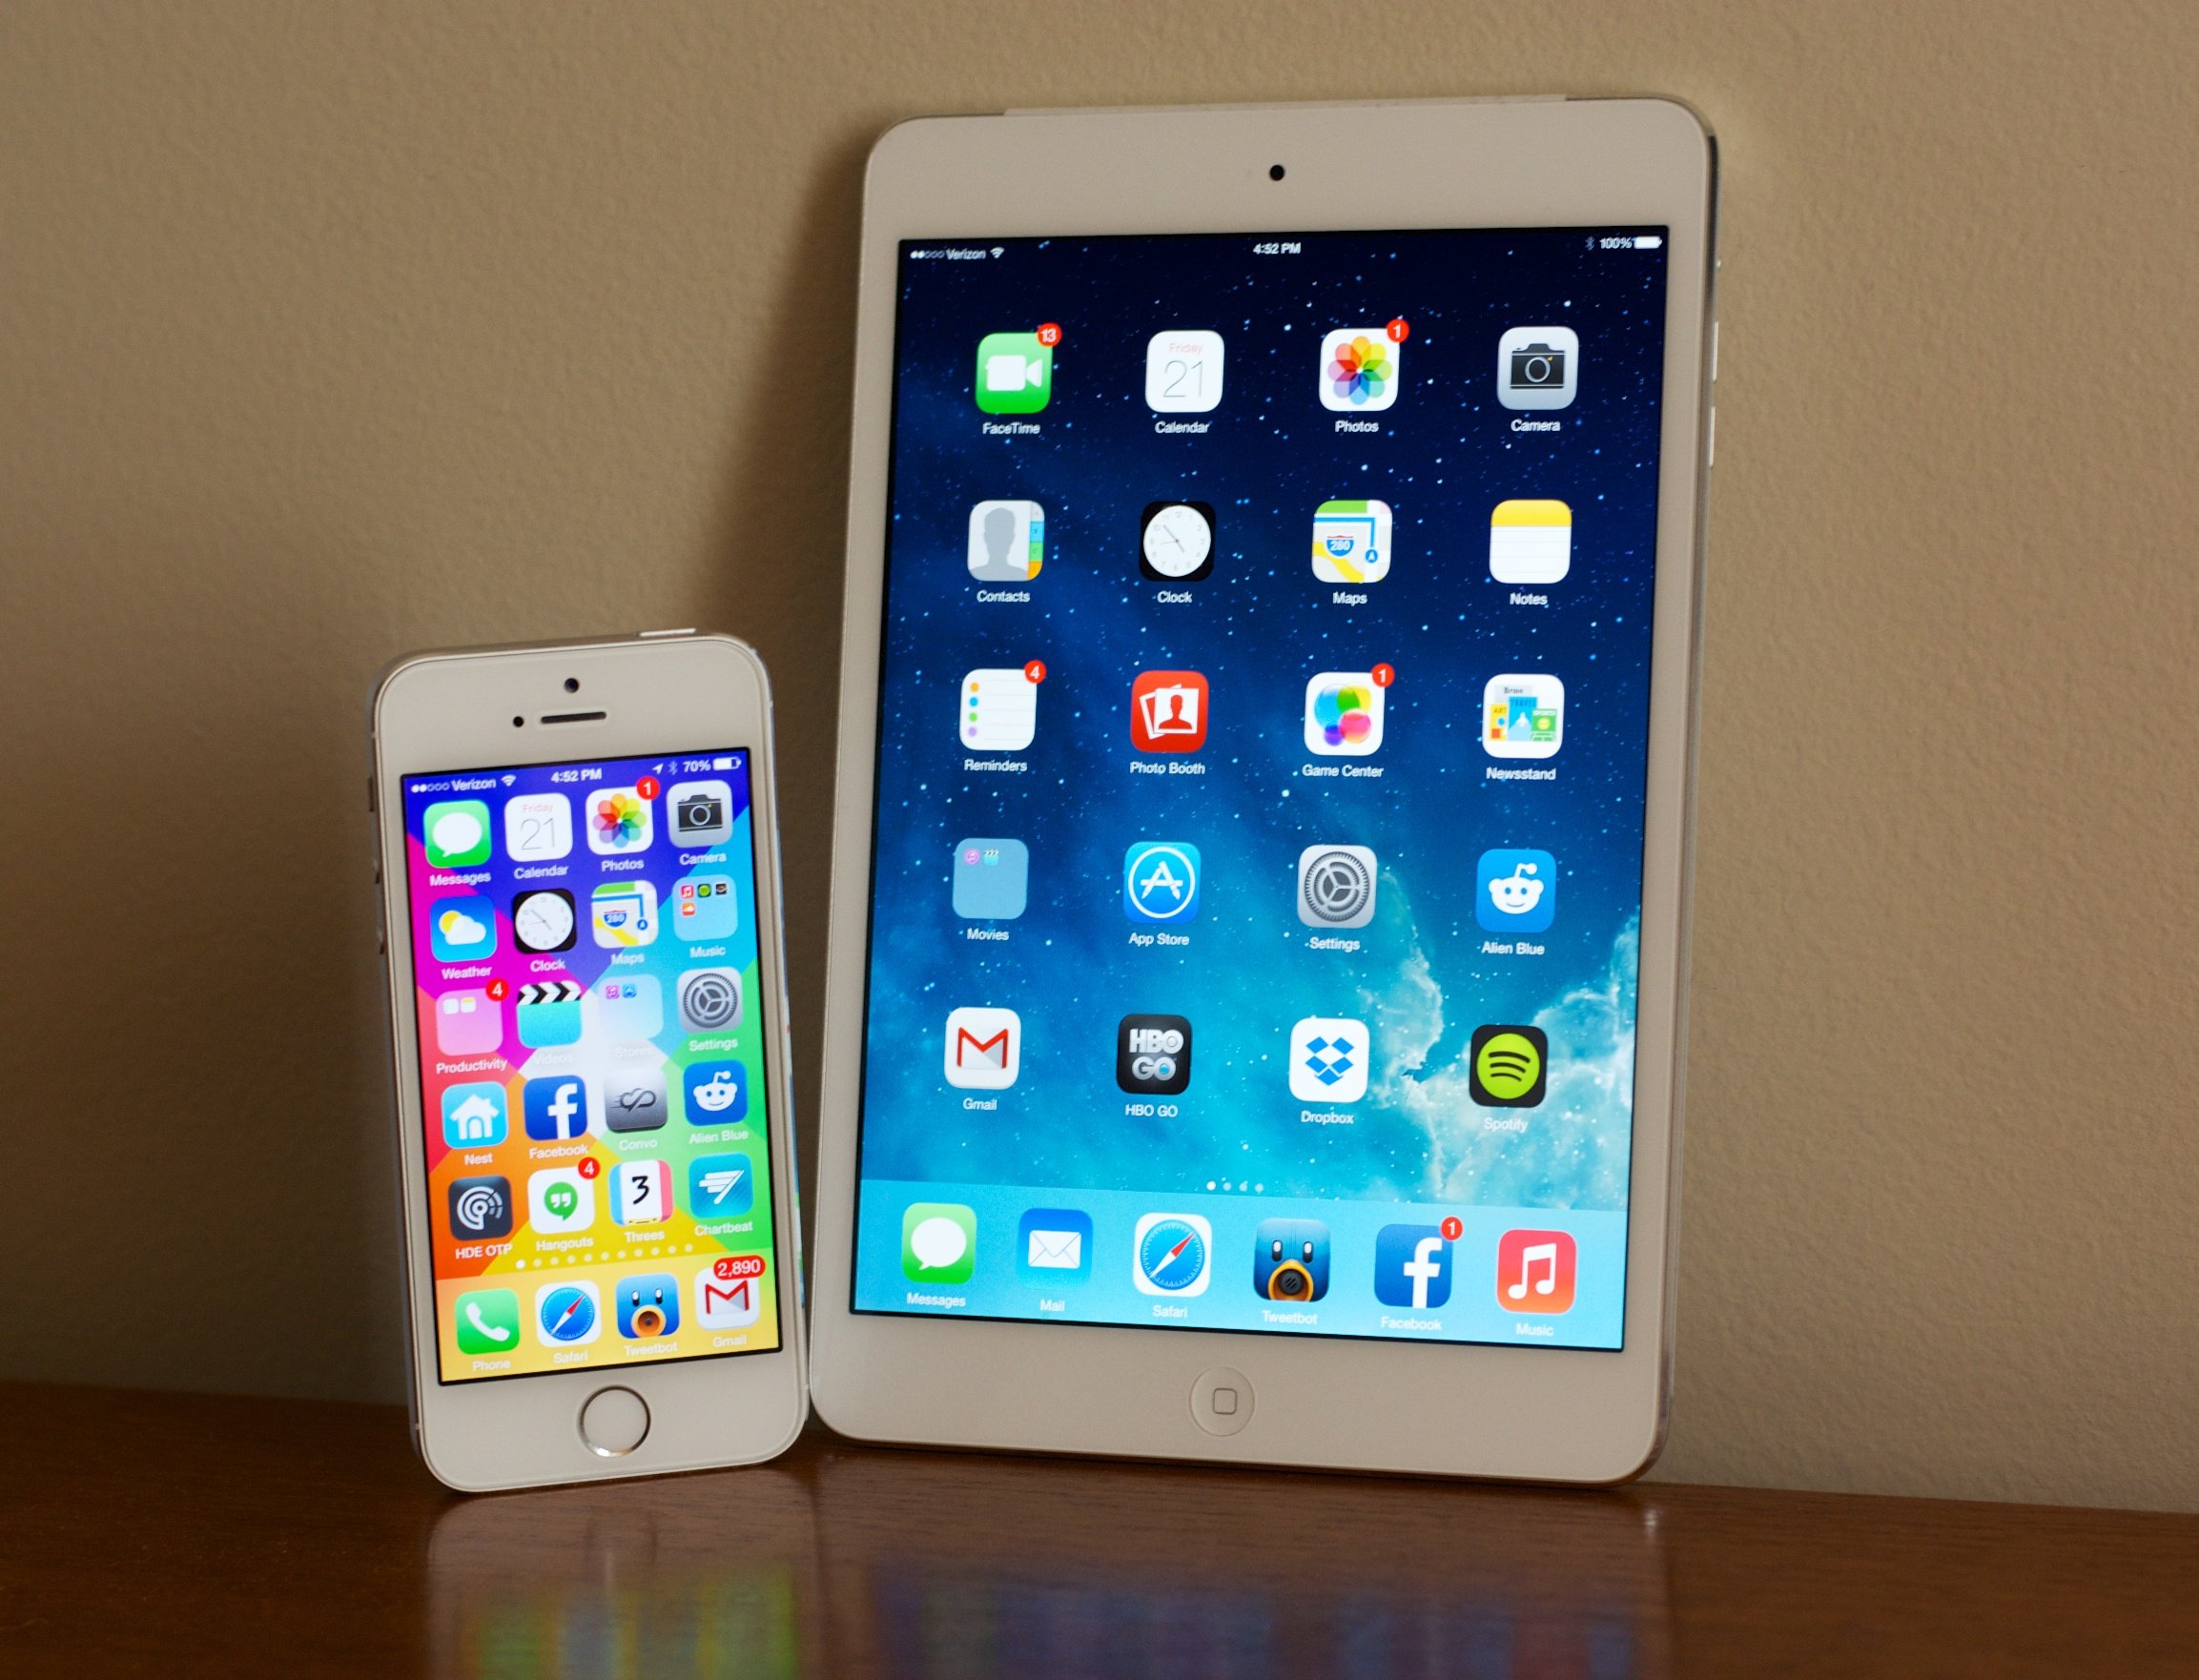 Apple's new program led some to believe Apple is ready for an iOS 8 beta for anyone, but that seems unlikely.